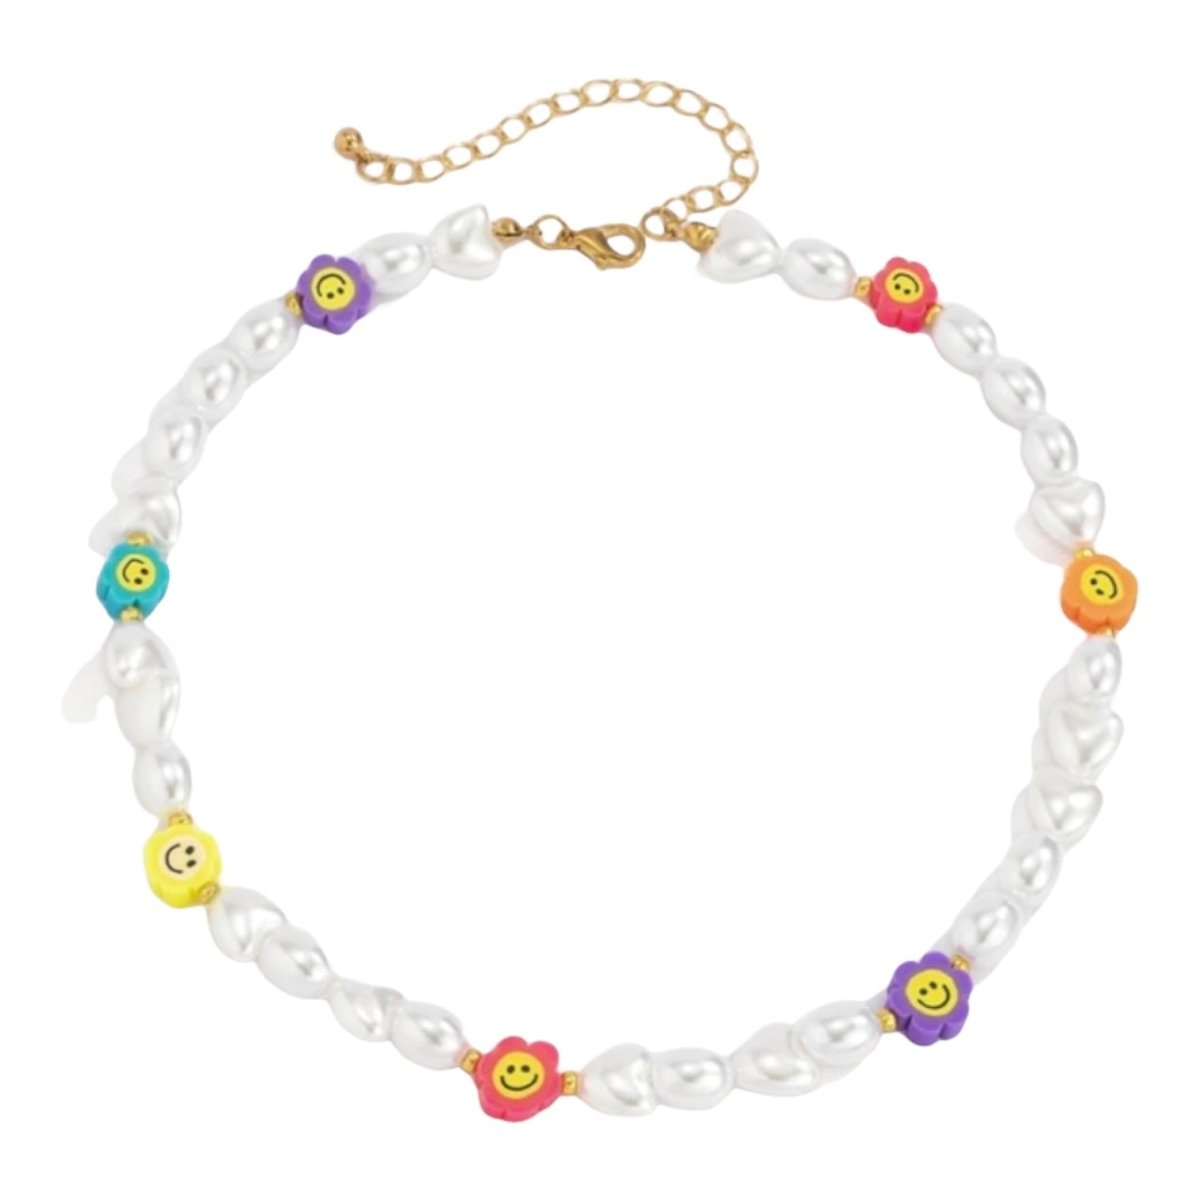 RAINBOW SMILEY FACE FLOWER & PEARLS NECKLACE - NECKLACES